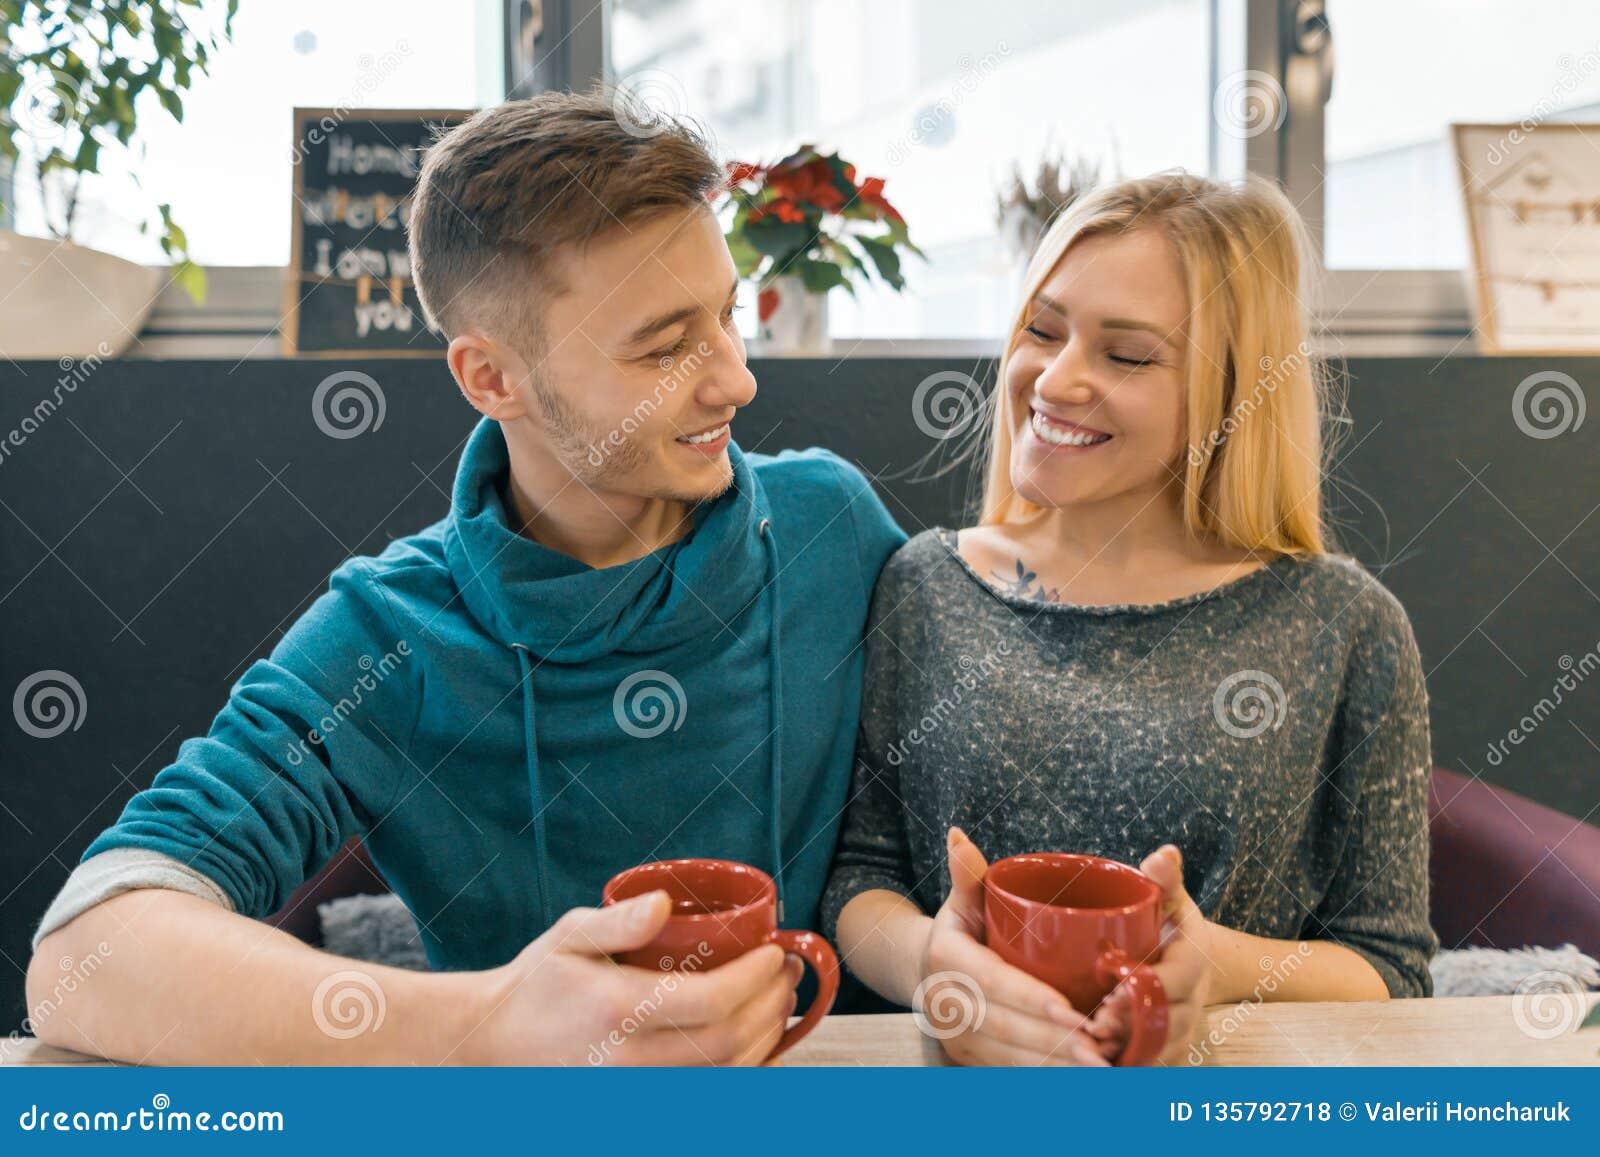 https://thumbs.dreamstime.com/z/young-happy-couple-love-cafe-man-woman-together-smile-hugging-drink-coffee-tea-135792718.jpg